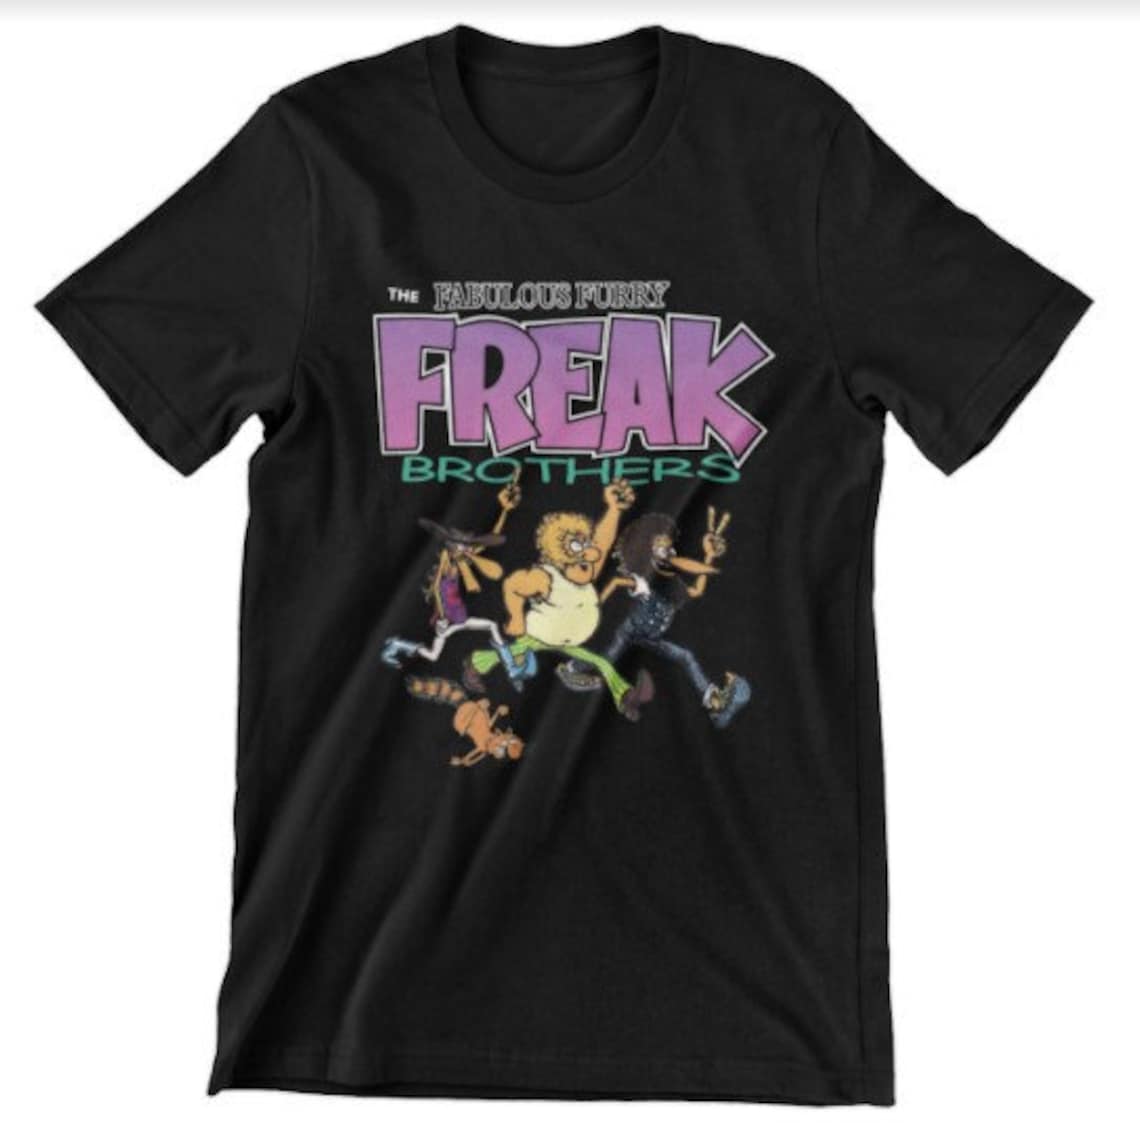 The Fabulous Furry Freak Brothers Shirt Essential T-Shirt | Etsy